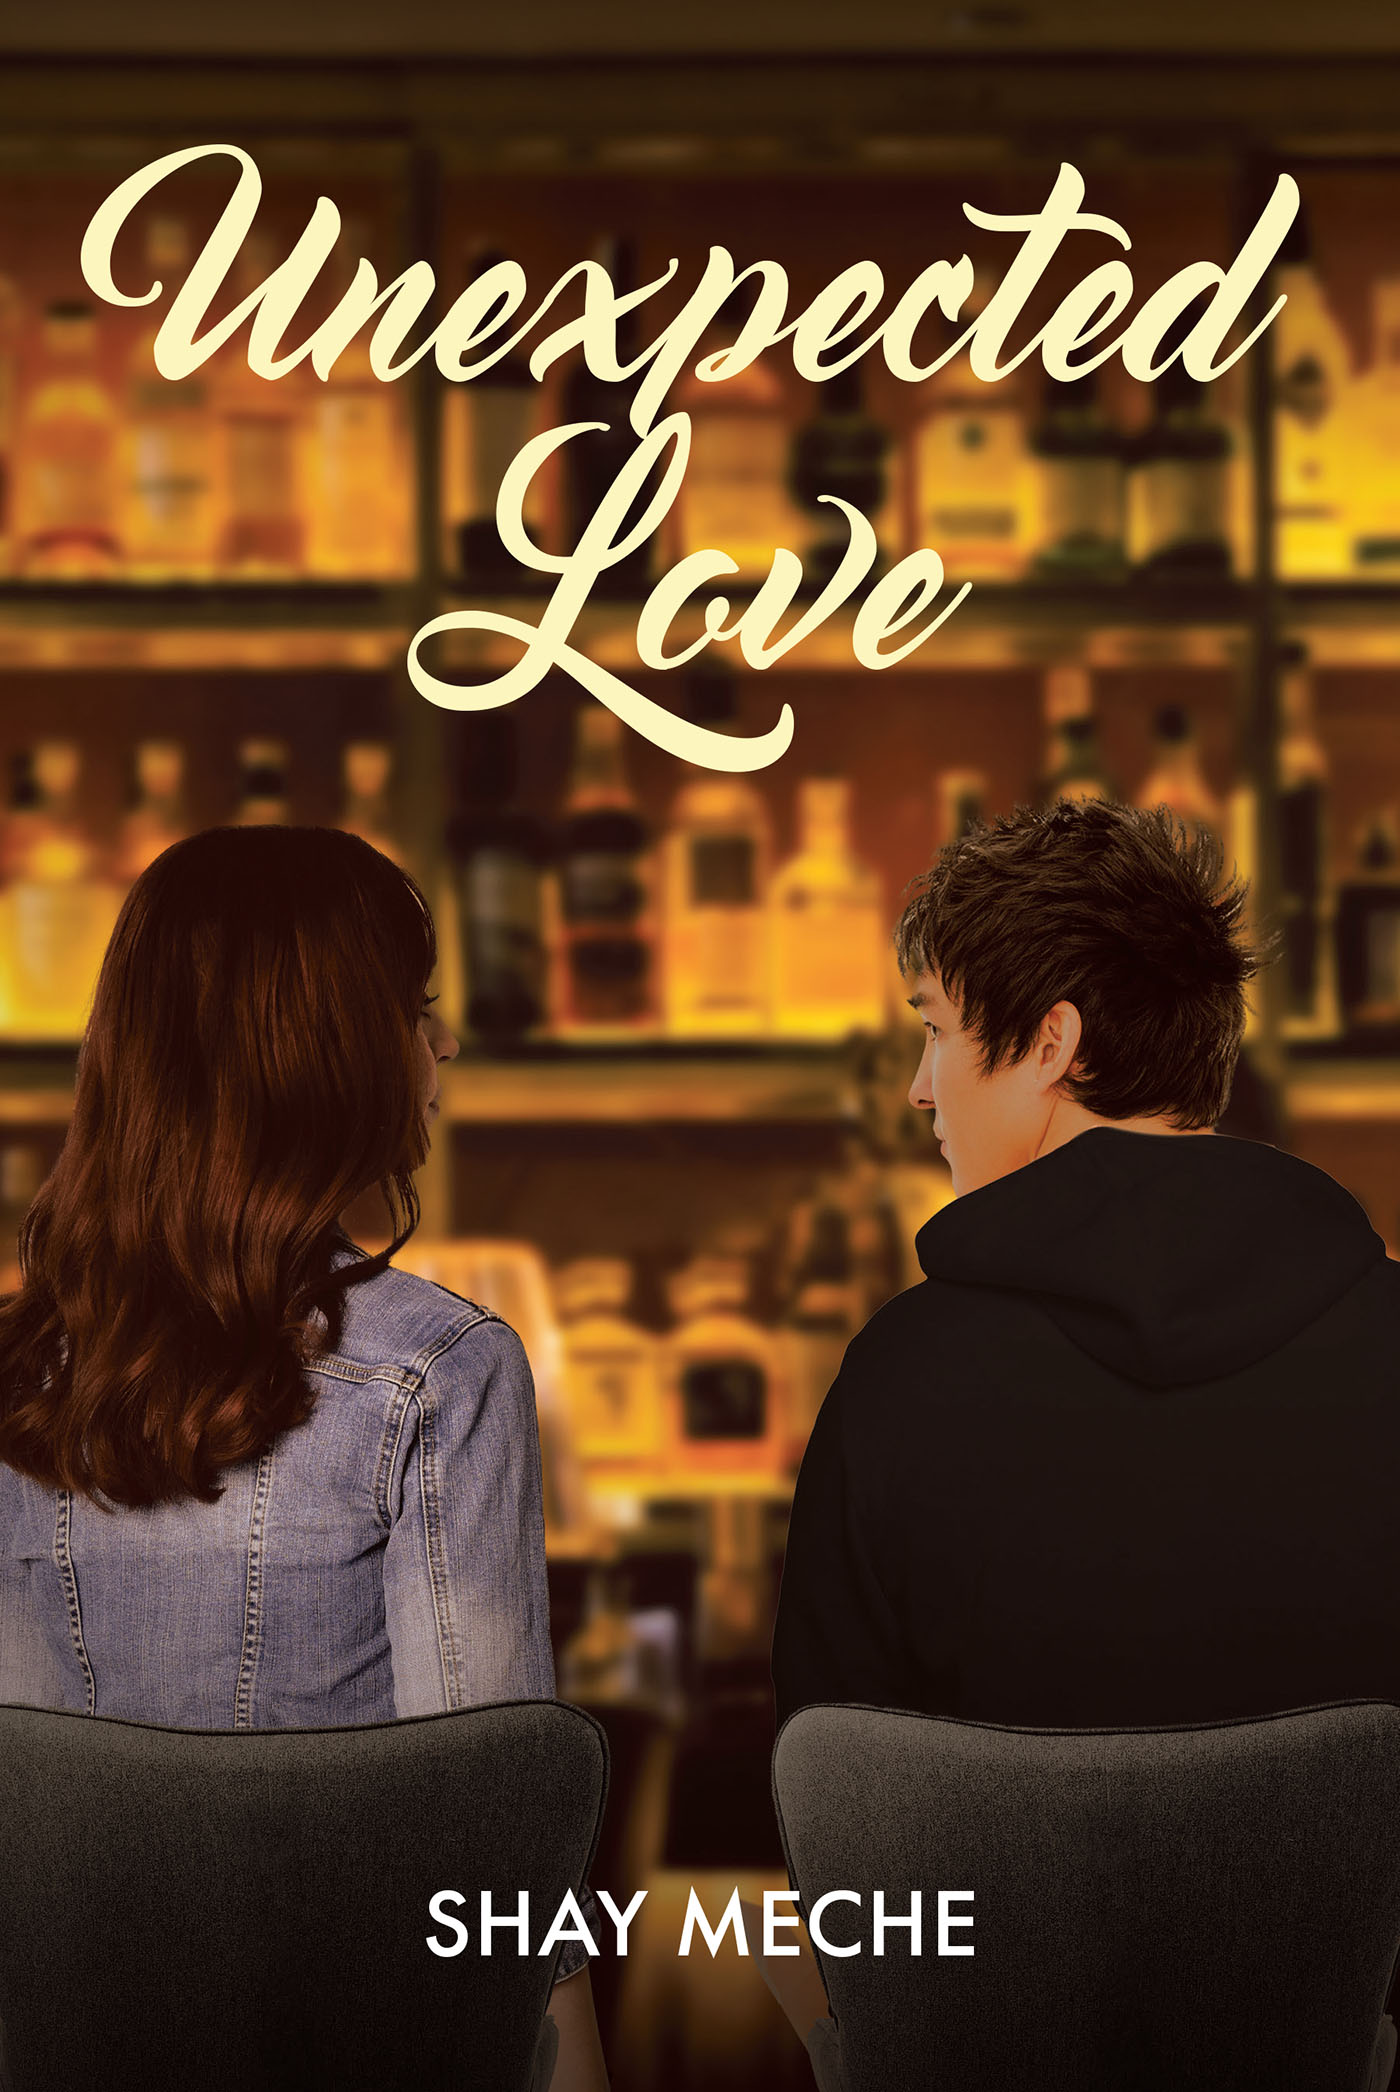 Author Shay Meche’s New Book, "Unexpected Love," is the Story of Two People Broken by Their Pasts But Through Love Find Something Special